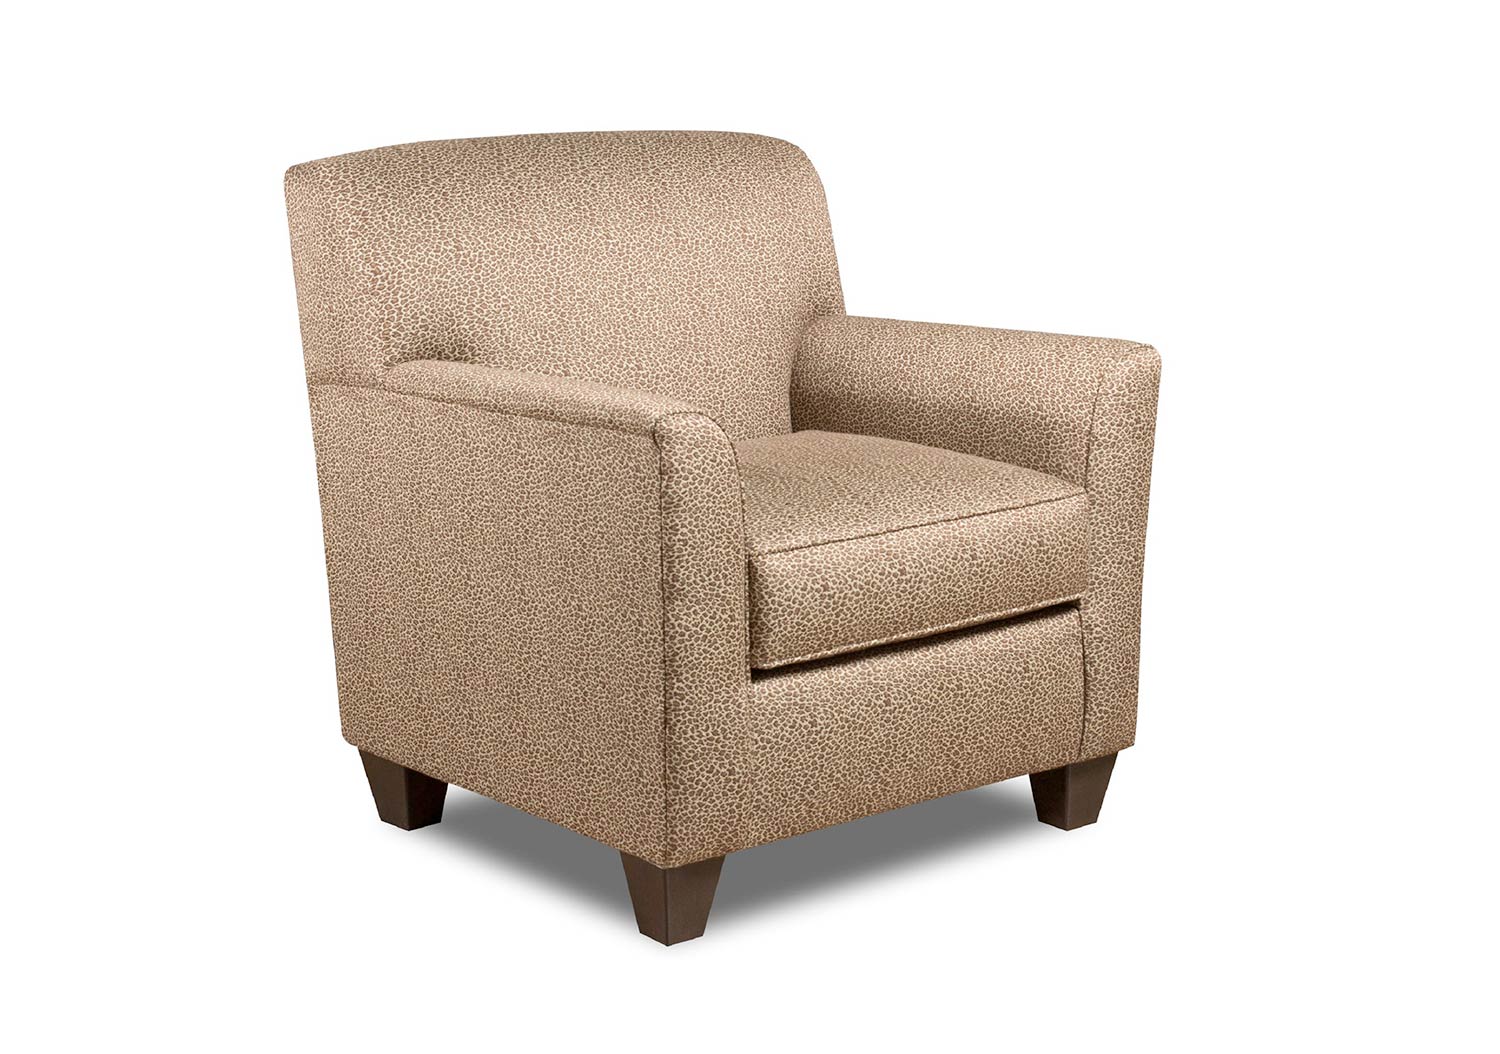 Chelsea Home Zaire Accent Chair - Chocolate